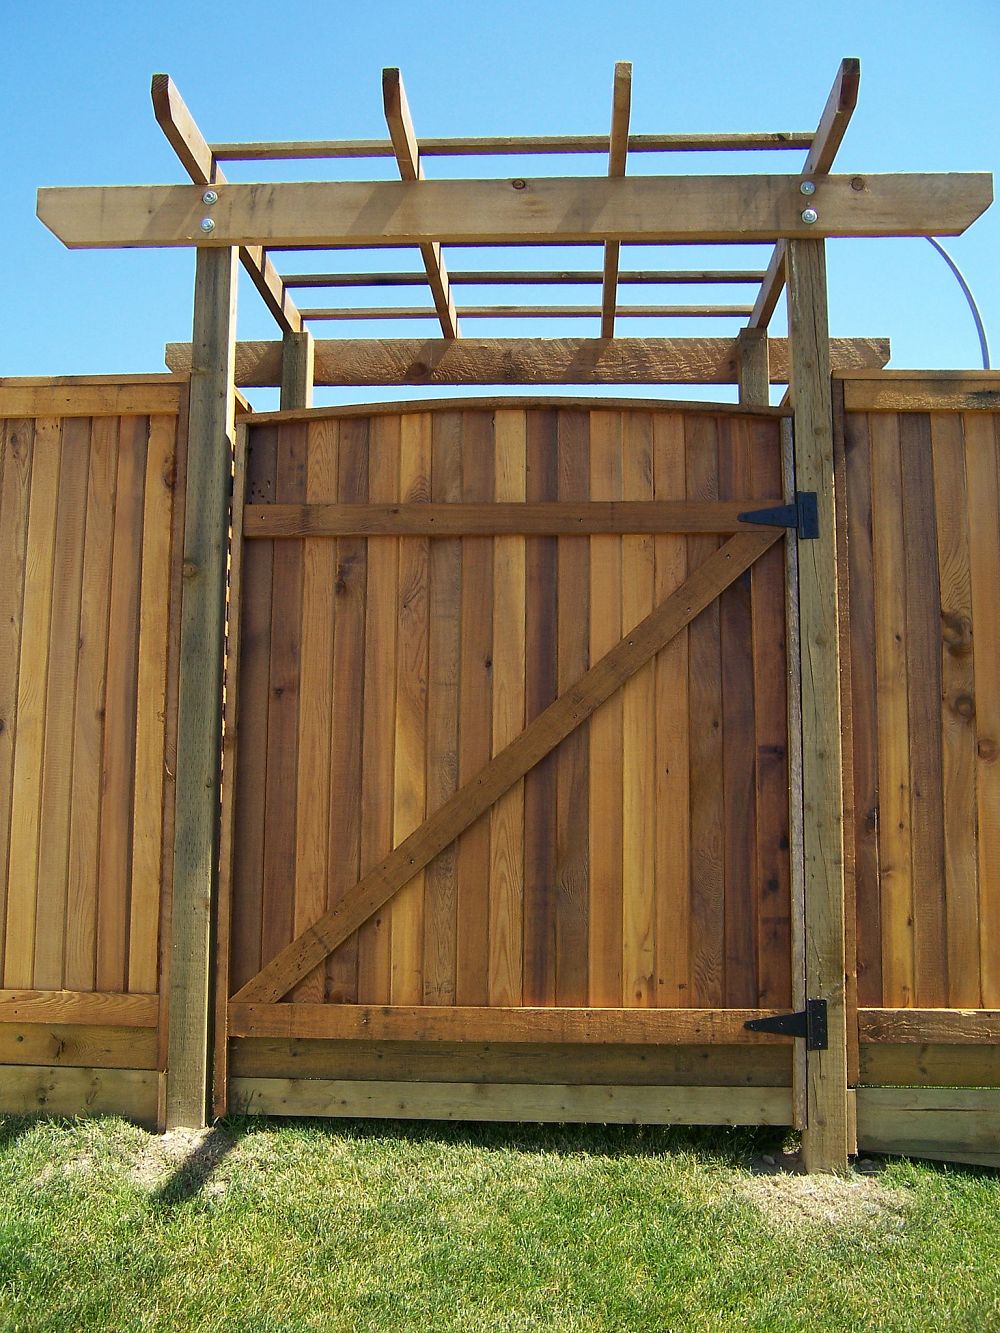 Update Your Fence with The Coolest Gate on the Block